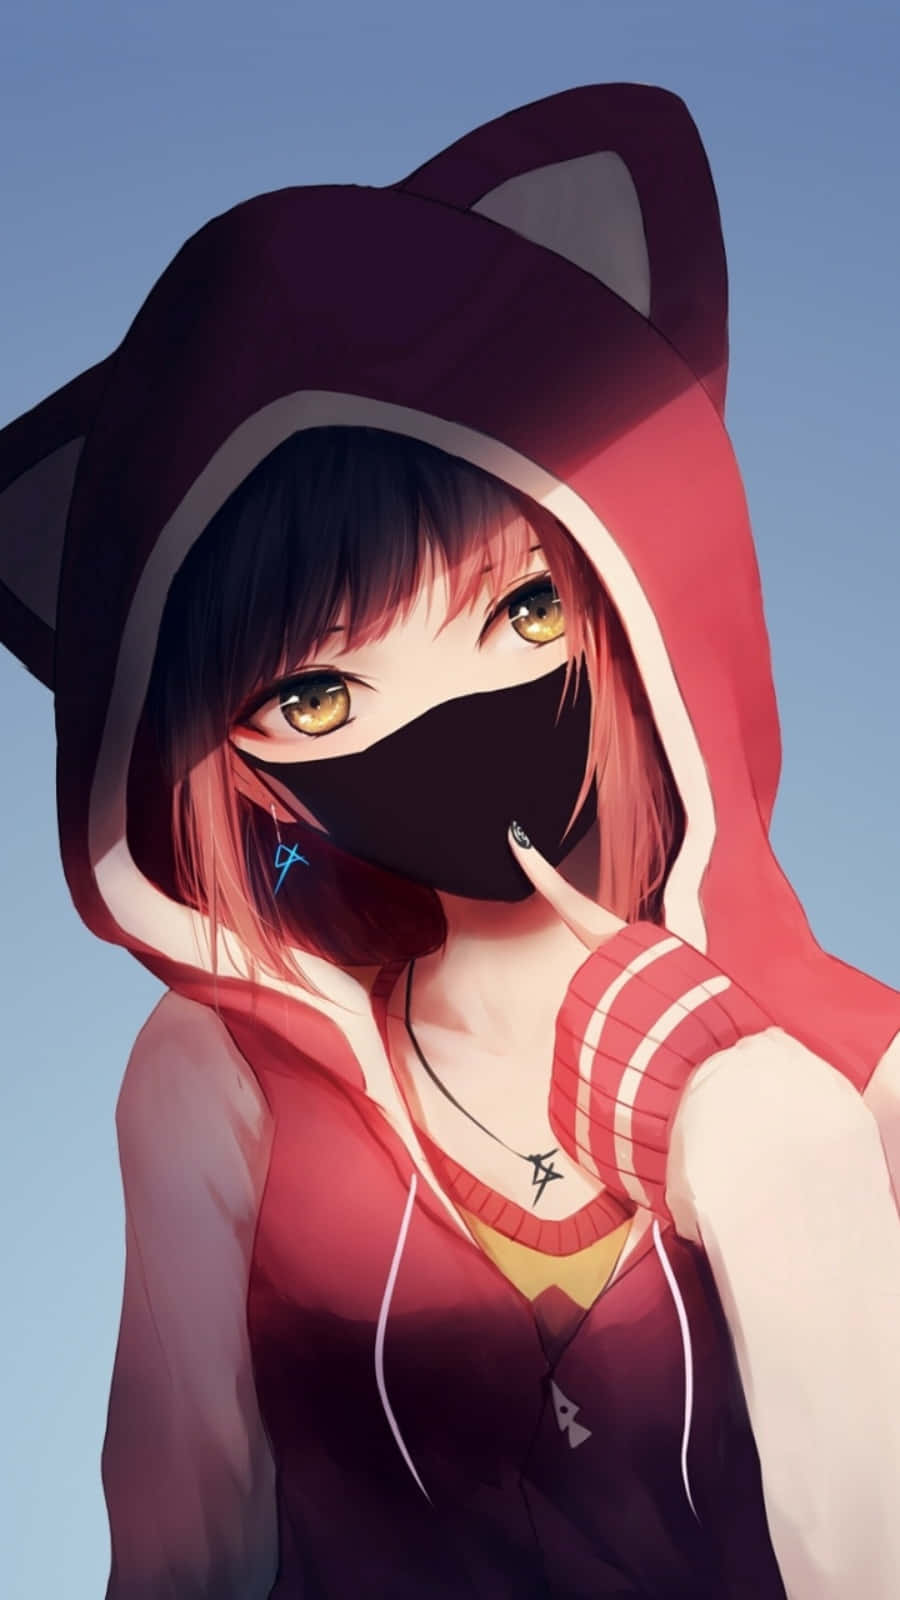 A Girl In A Hoodie With A Mask On Her Face